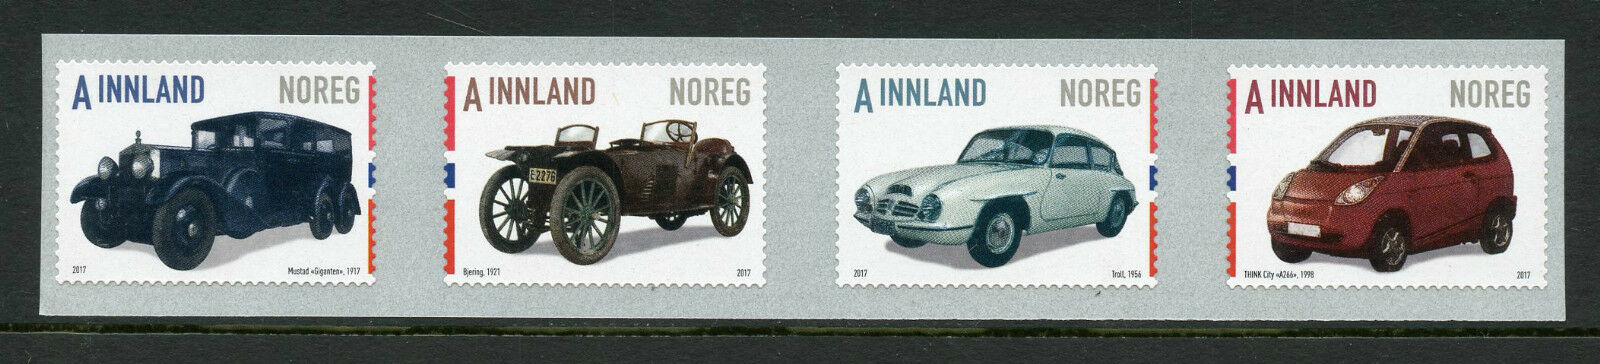 Norway 2017 MNH Norwegian Cars Bjering Troll Think Mustad 4v S/A Coil Set Stamps